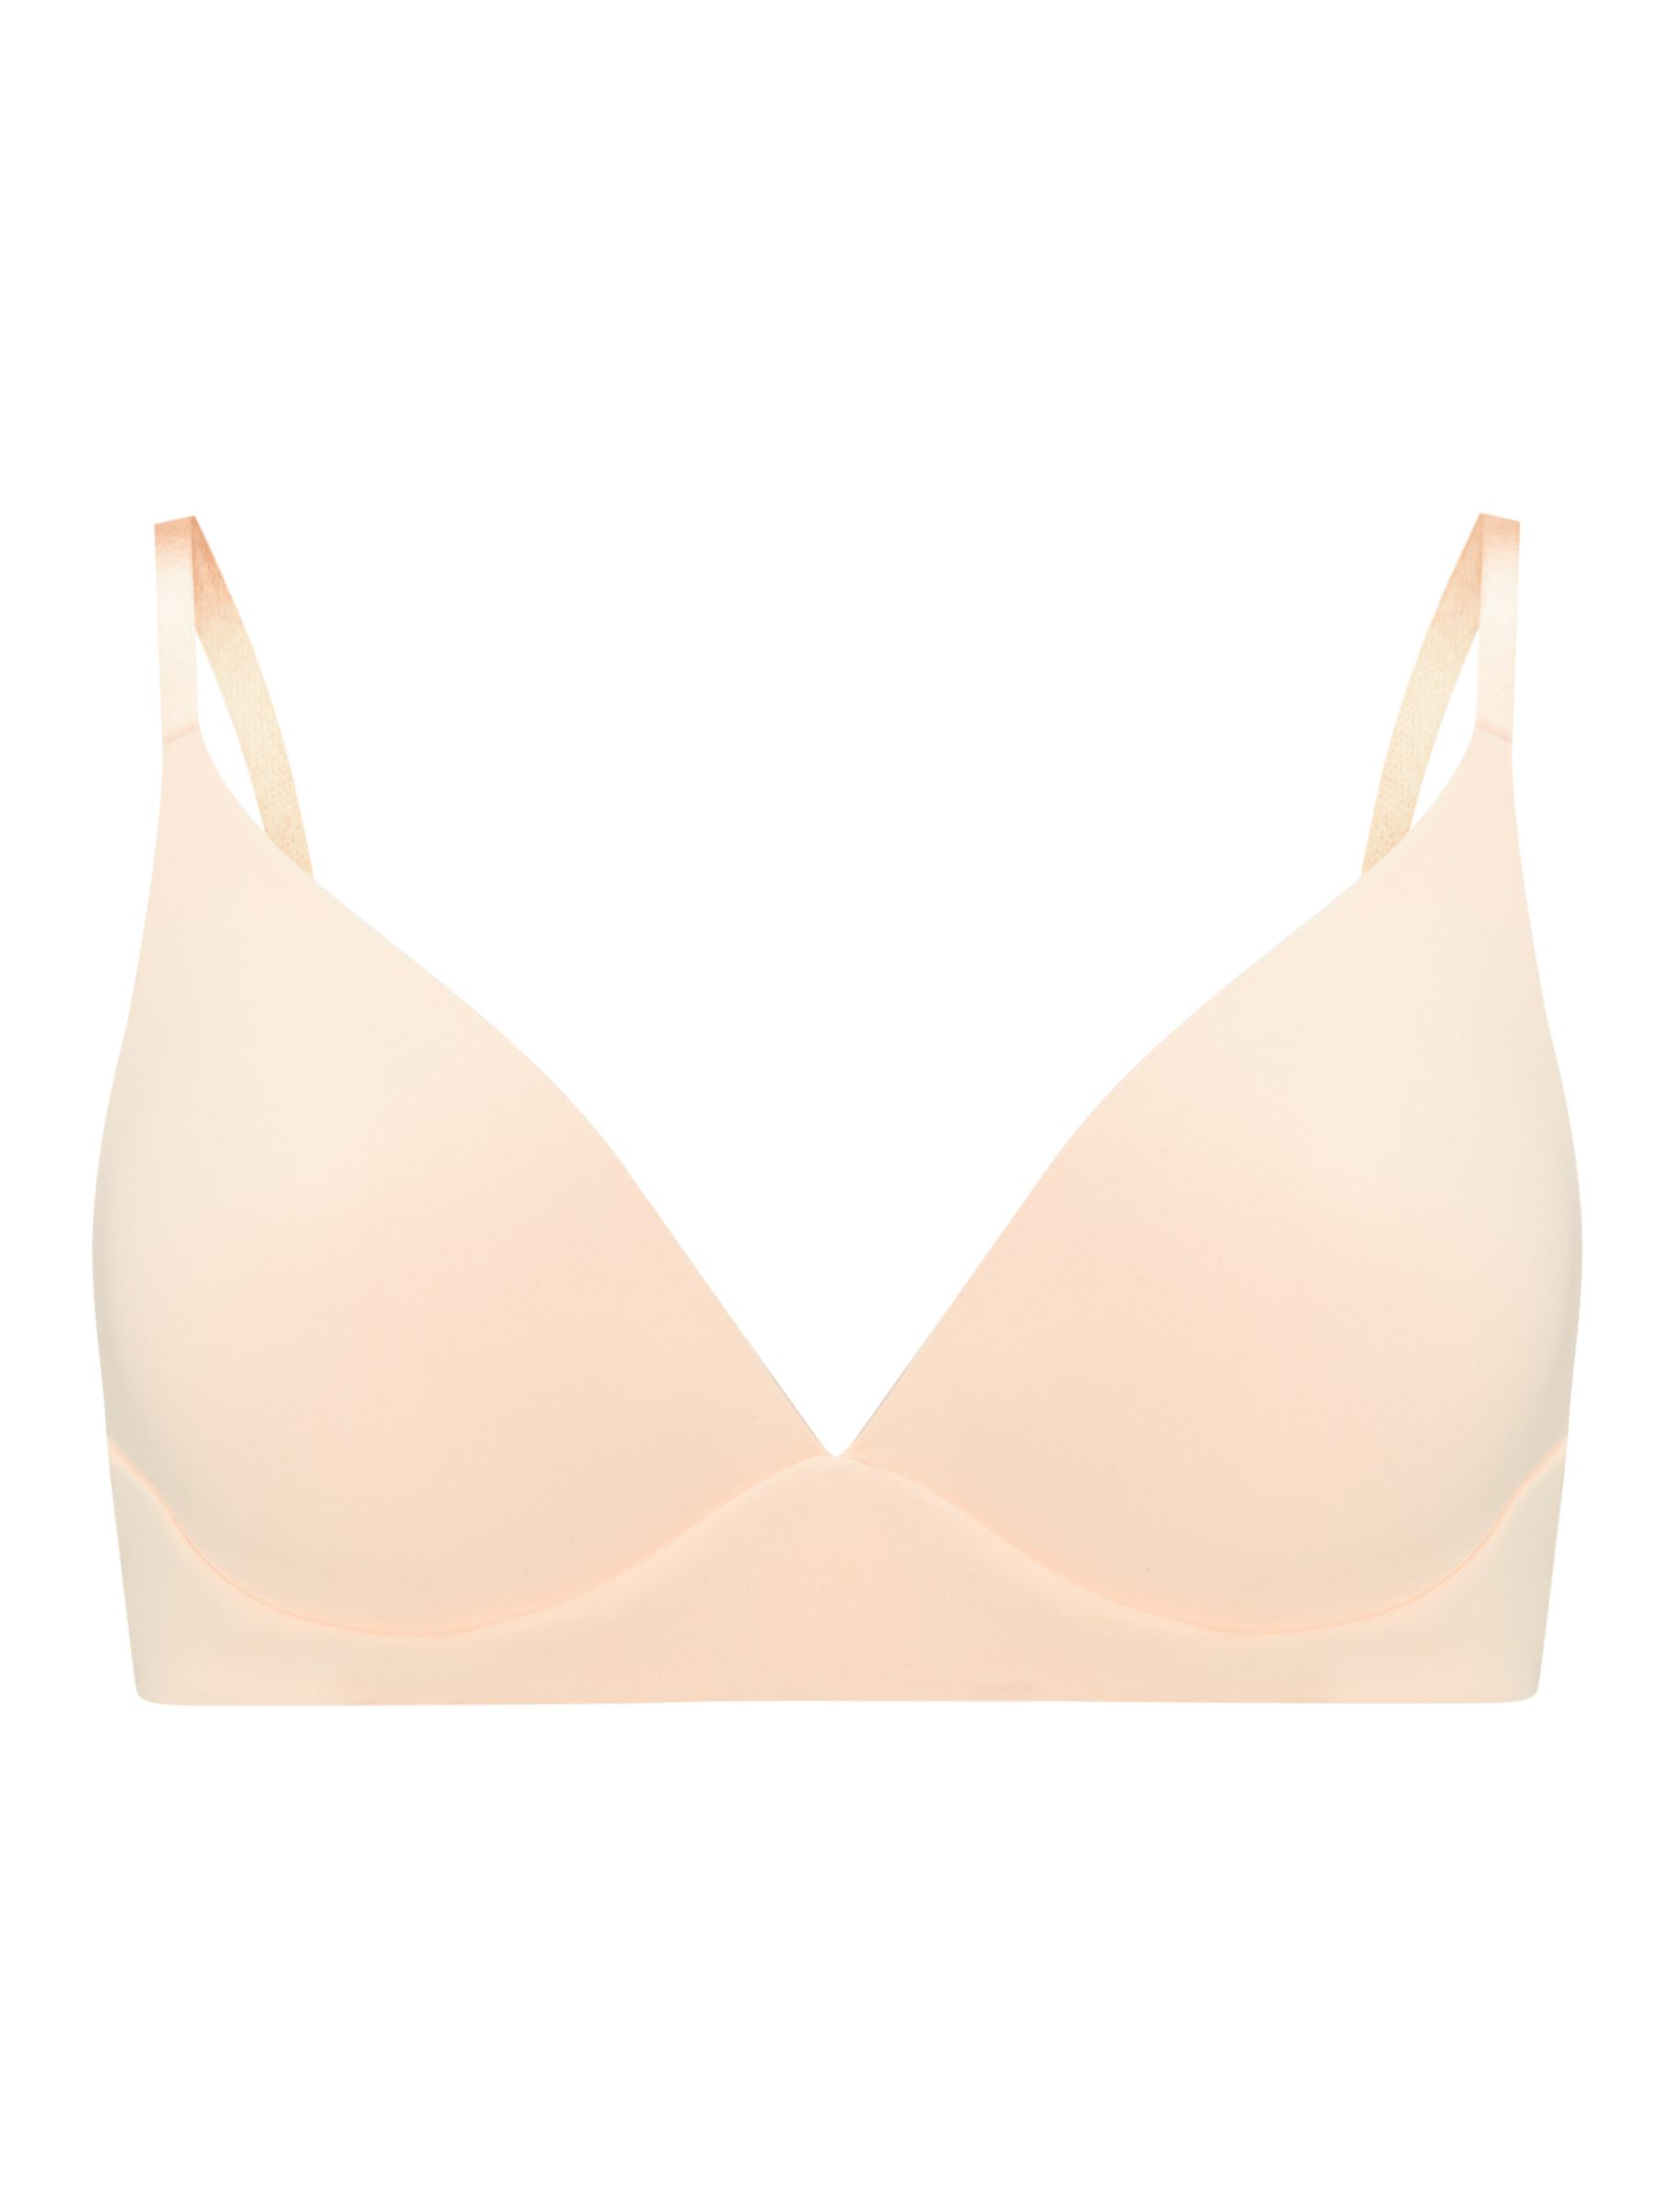 John Lewis ANYDAY Willow Non-Wired Bra, Almond at John Lewis & Partners